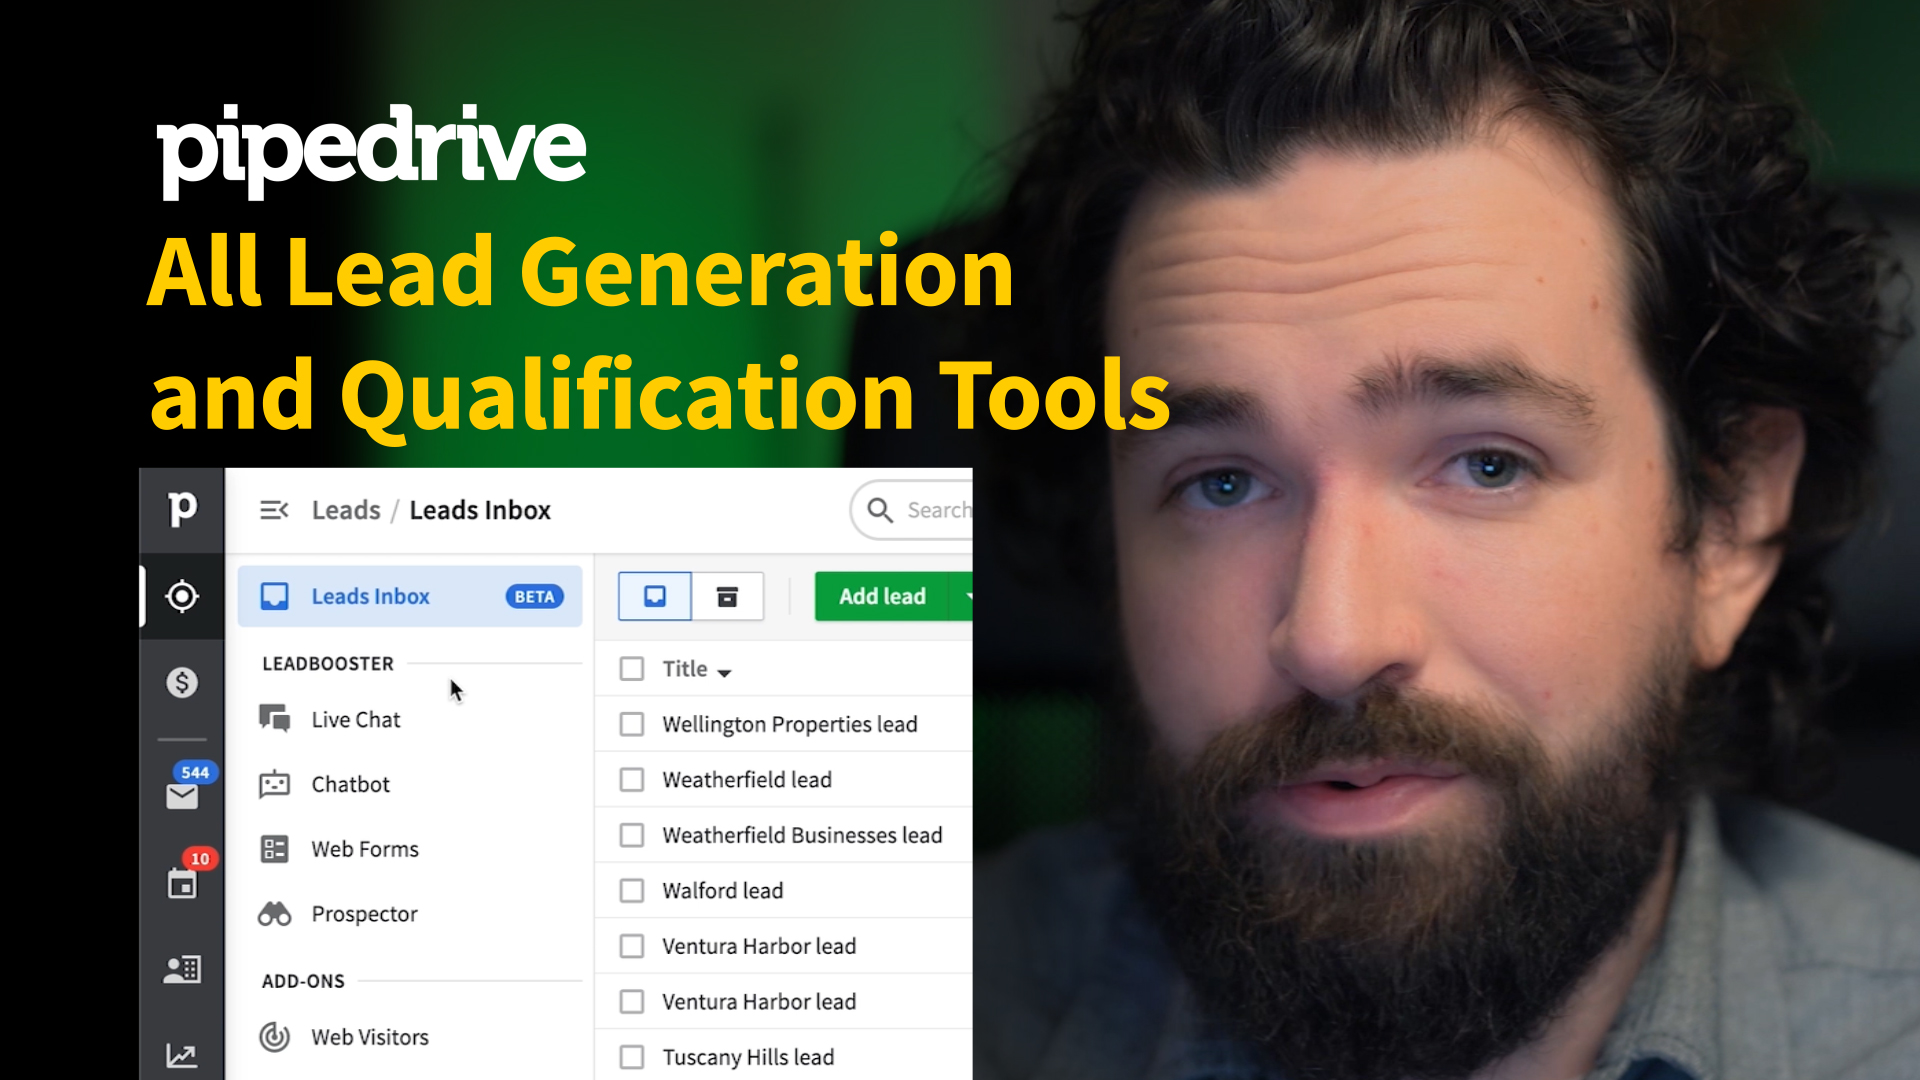 Demo – all lead generation and qualification tools